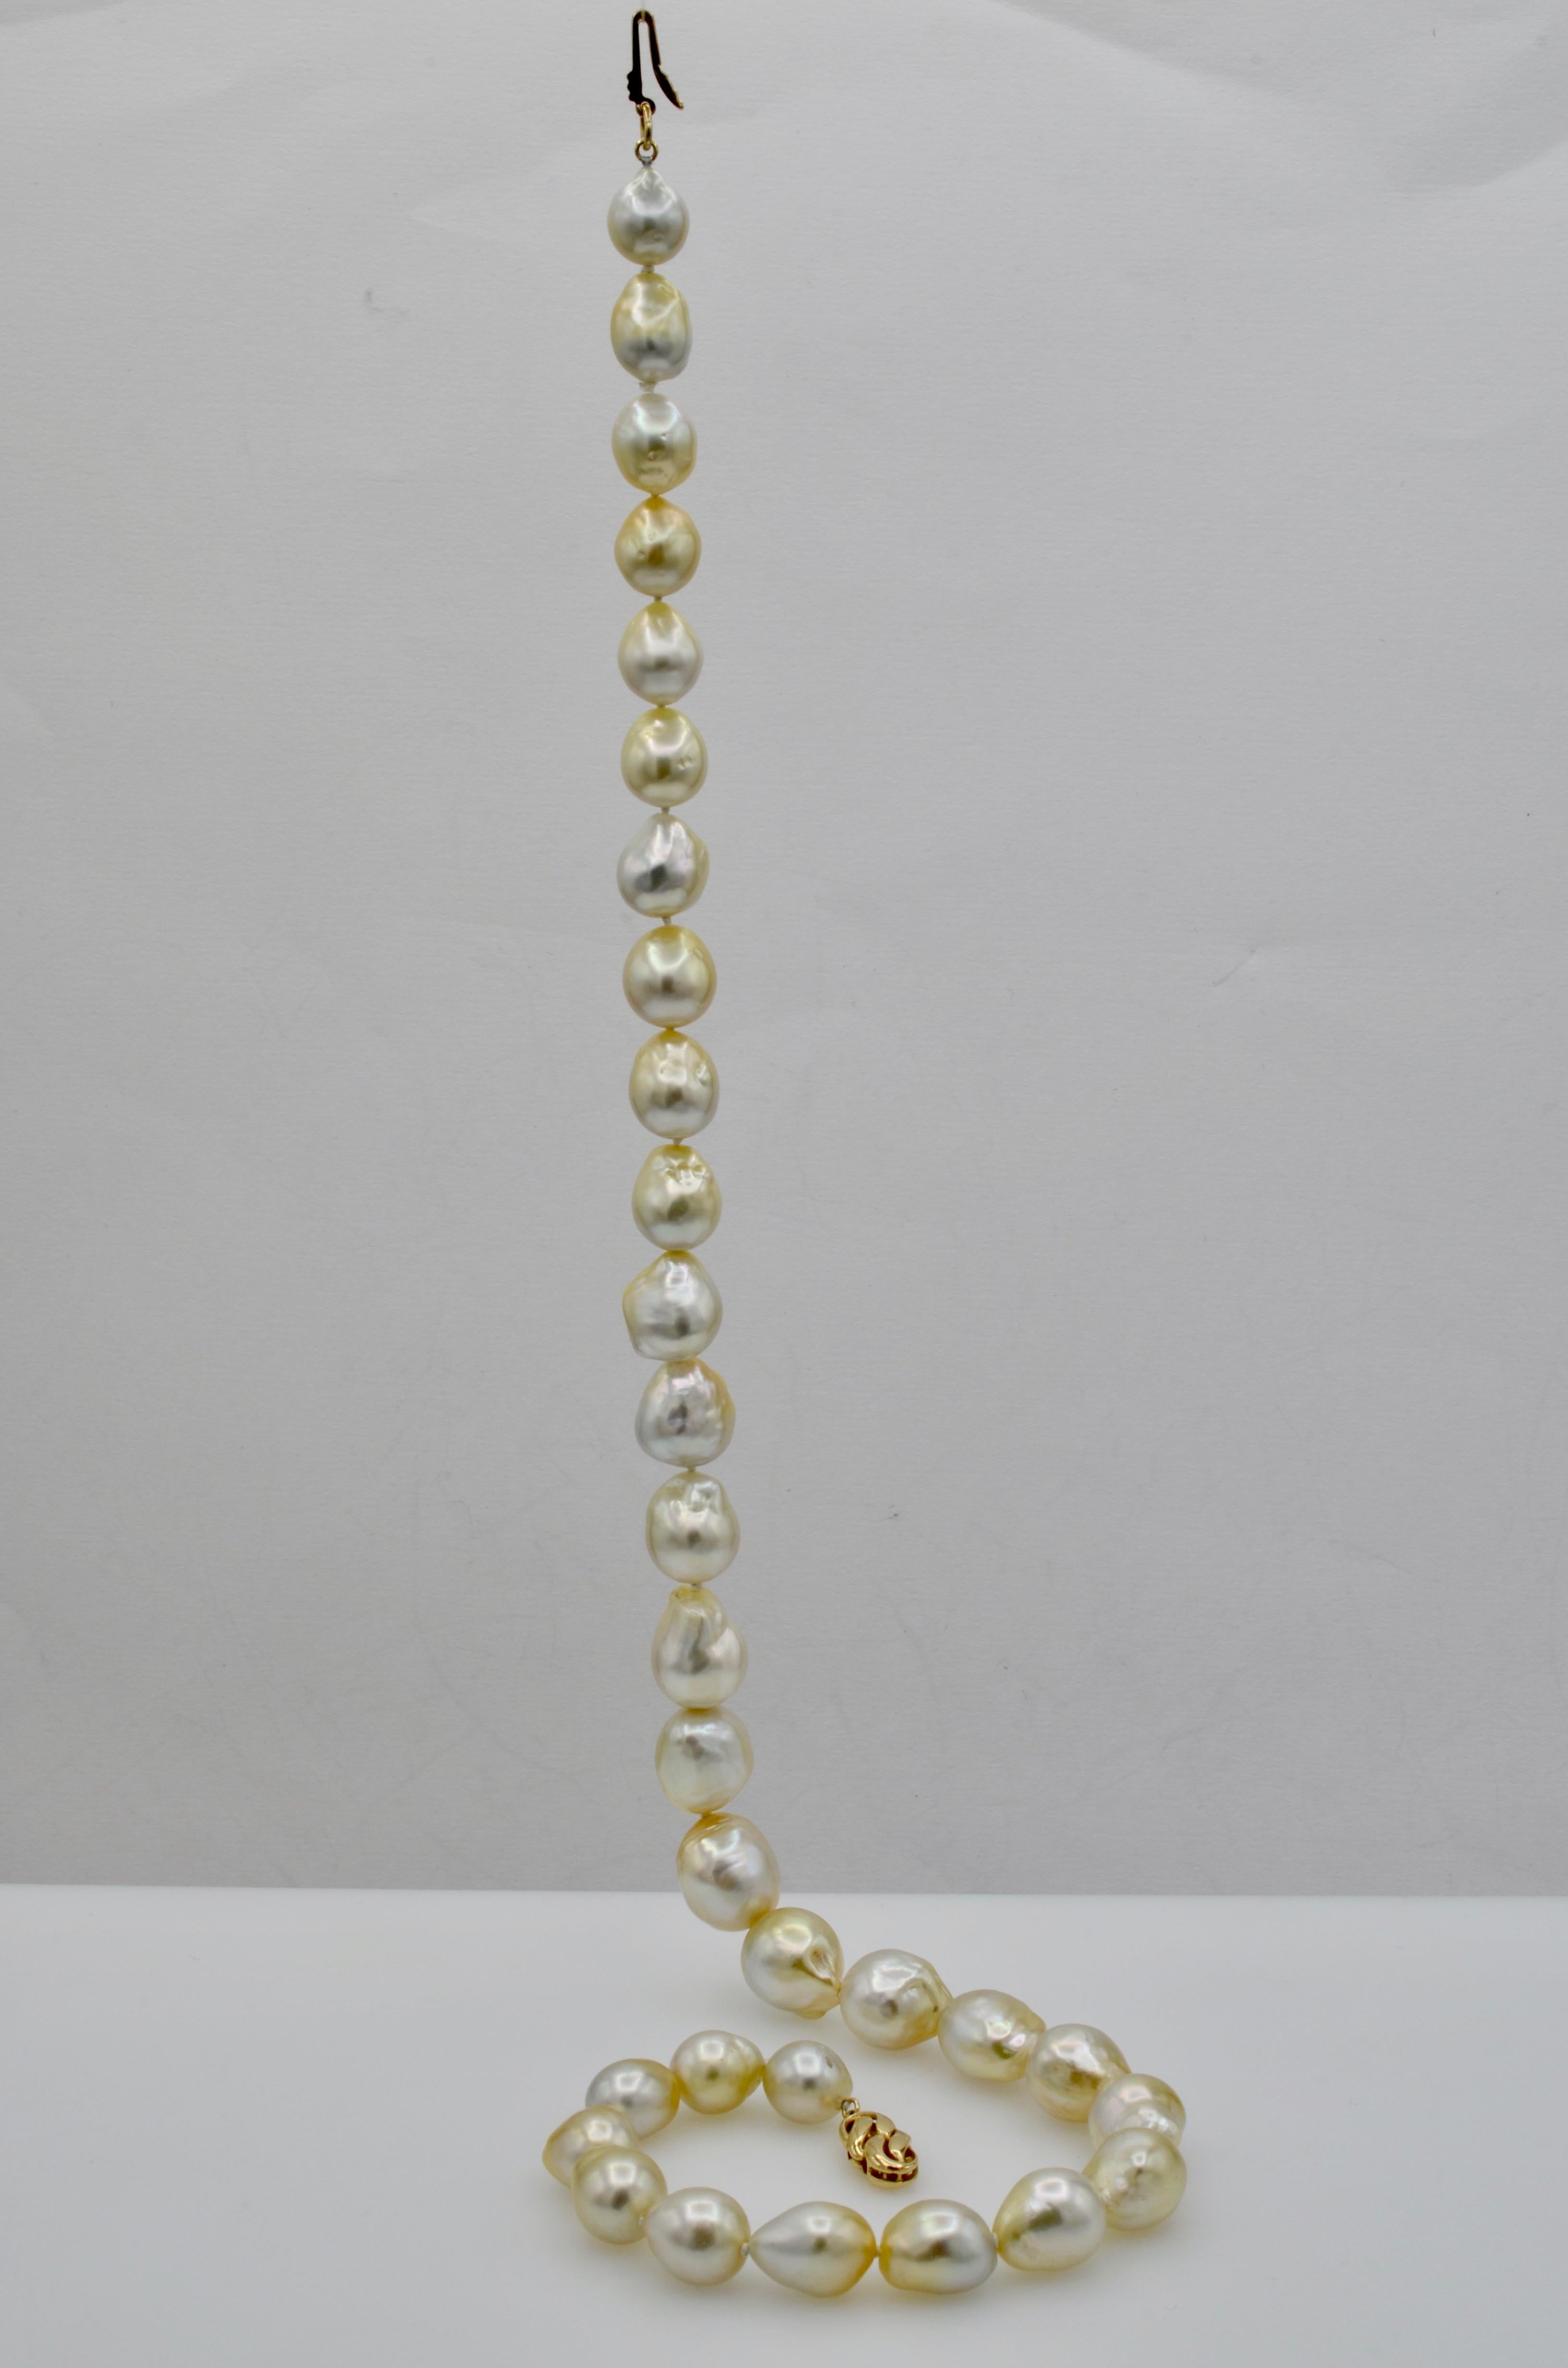 South Sea Pearl White Baroque Necklace 14 Karat Gold 1